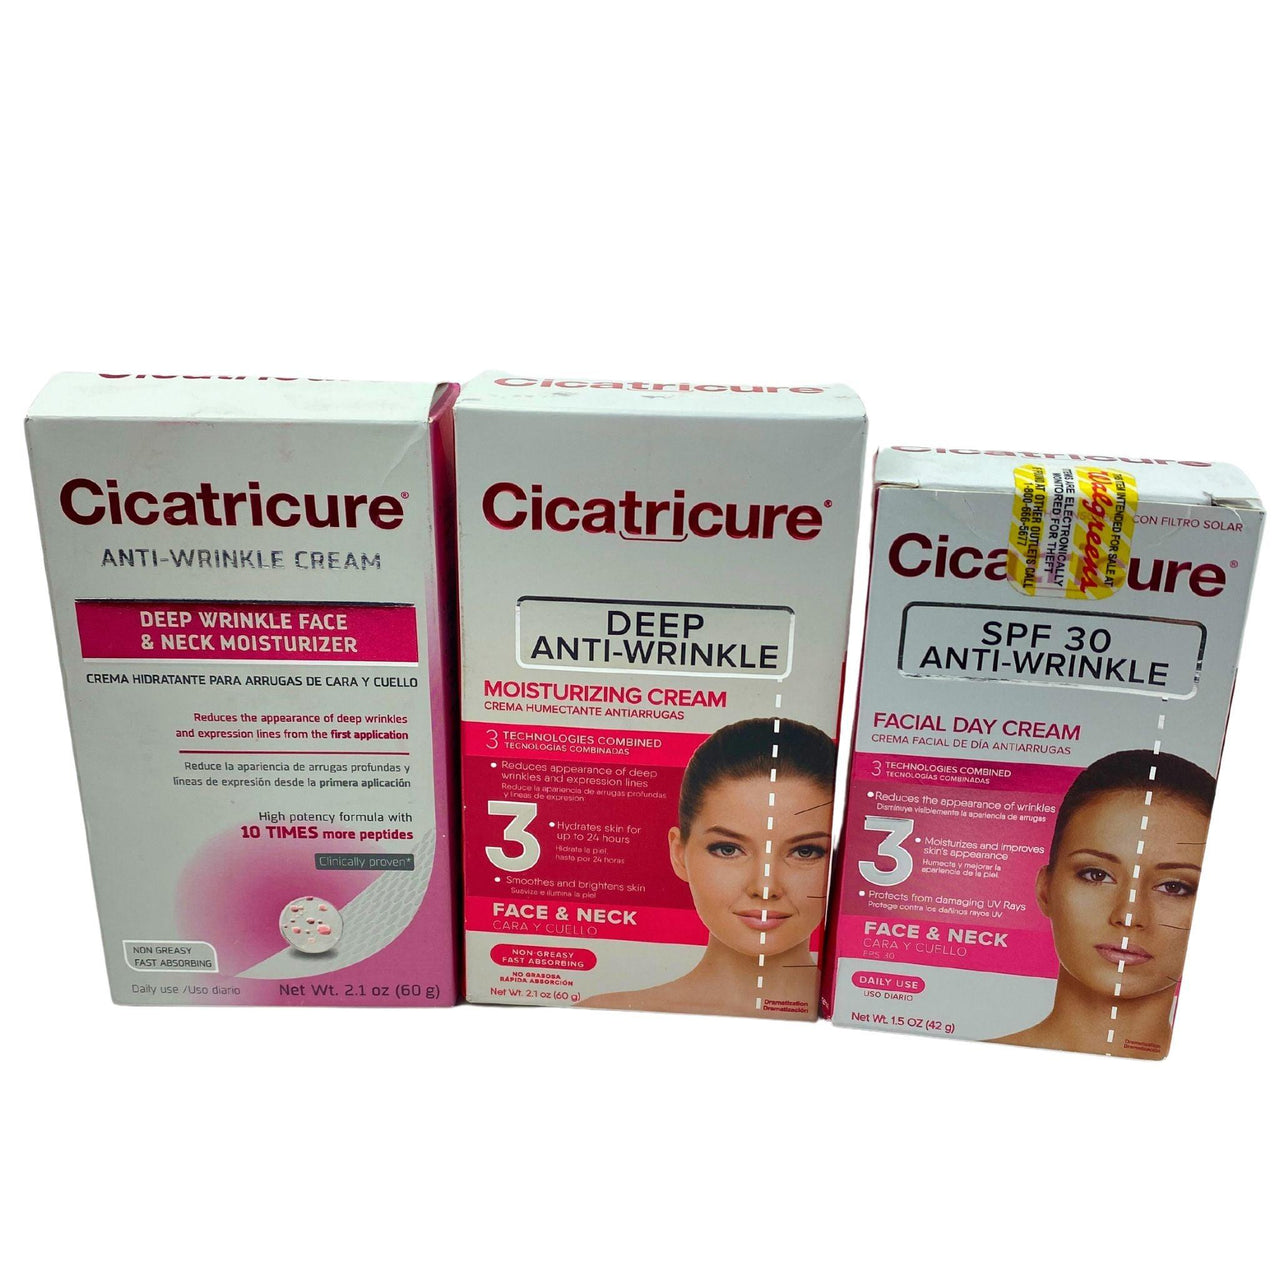 Cicatricure Anti Wrinkle Face & Neck Cream and Cicatricure Advanced Face Cream for Fine Lines & Wrinkles (36 Pcs Lot) - Discount Wholesalers Inc